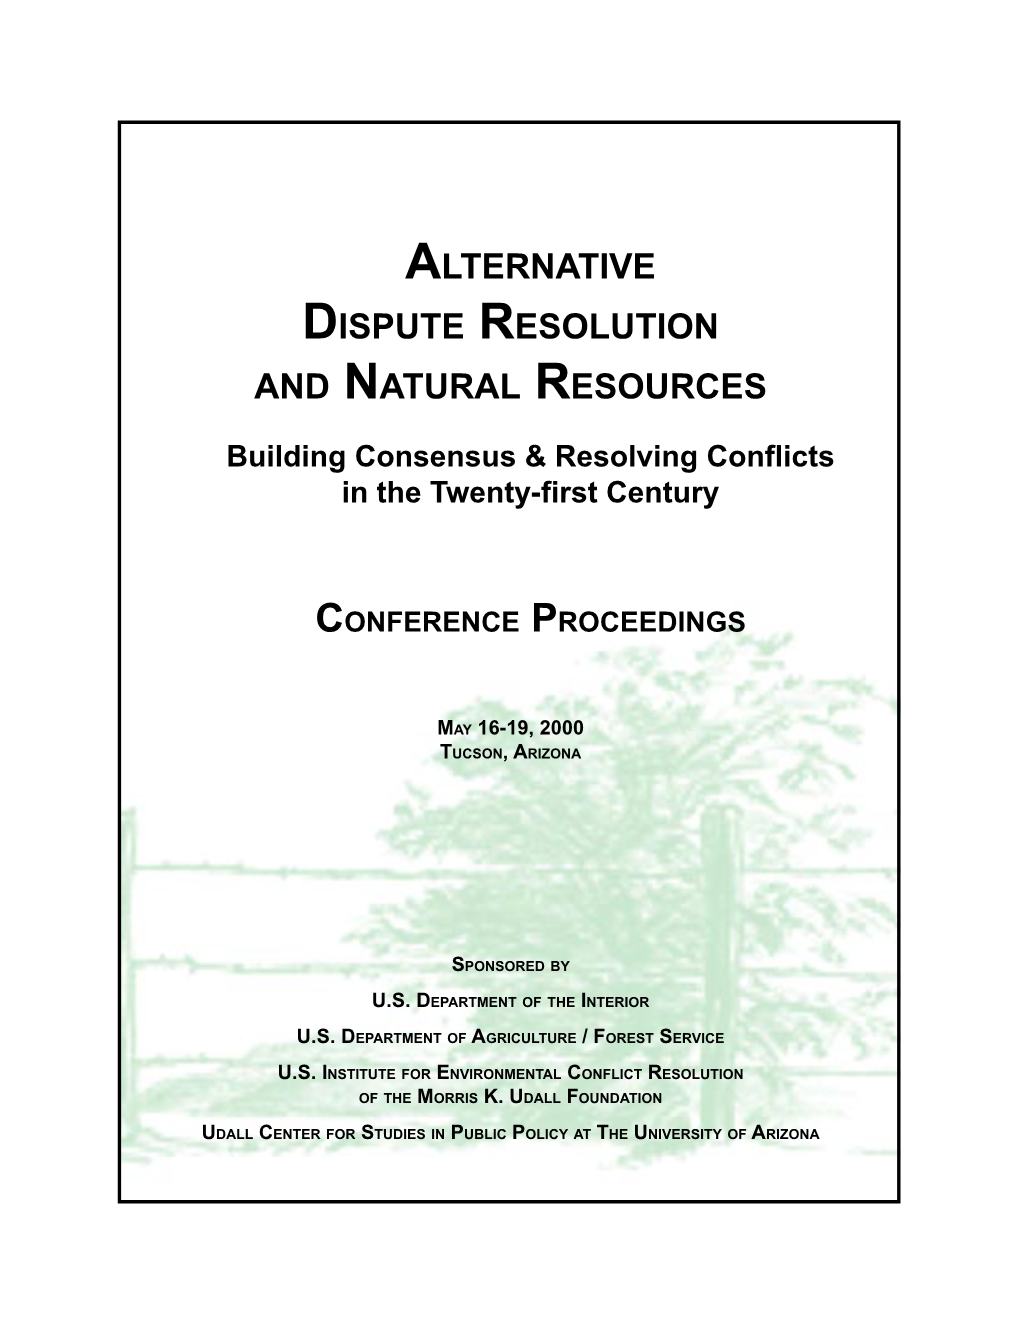 Alternative Dispute Resolution and Natural Resources